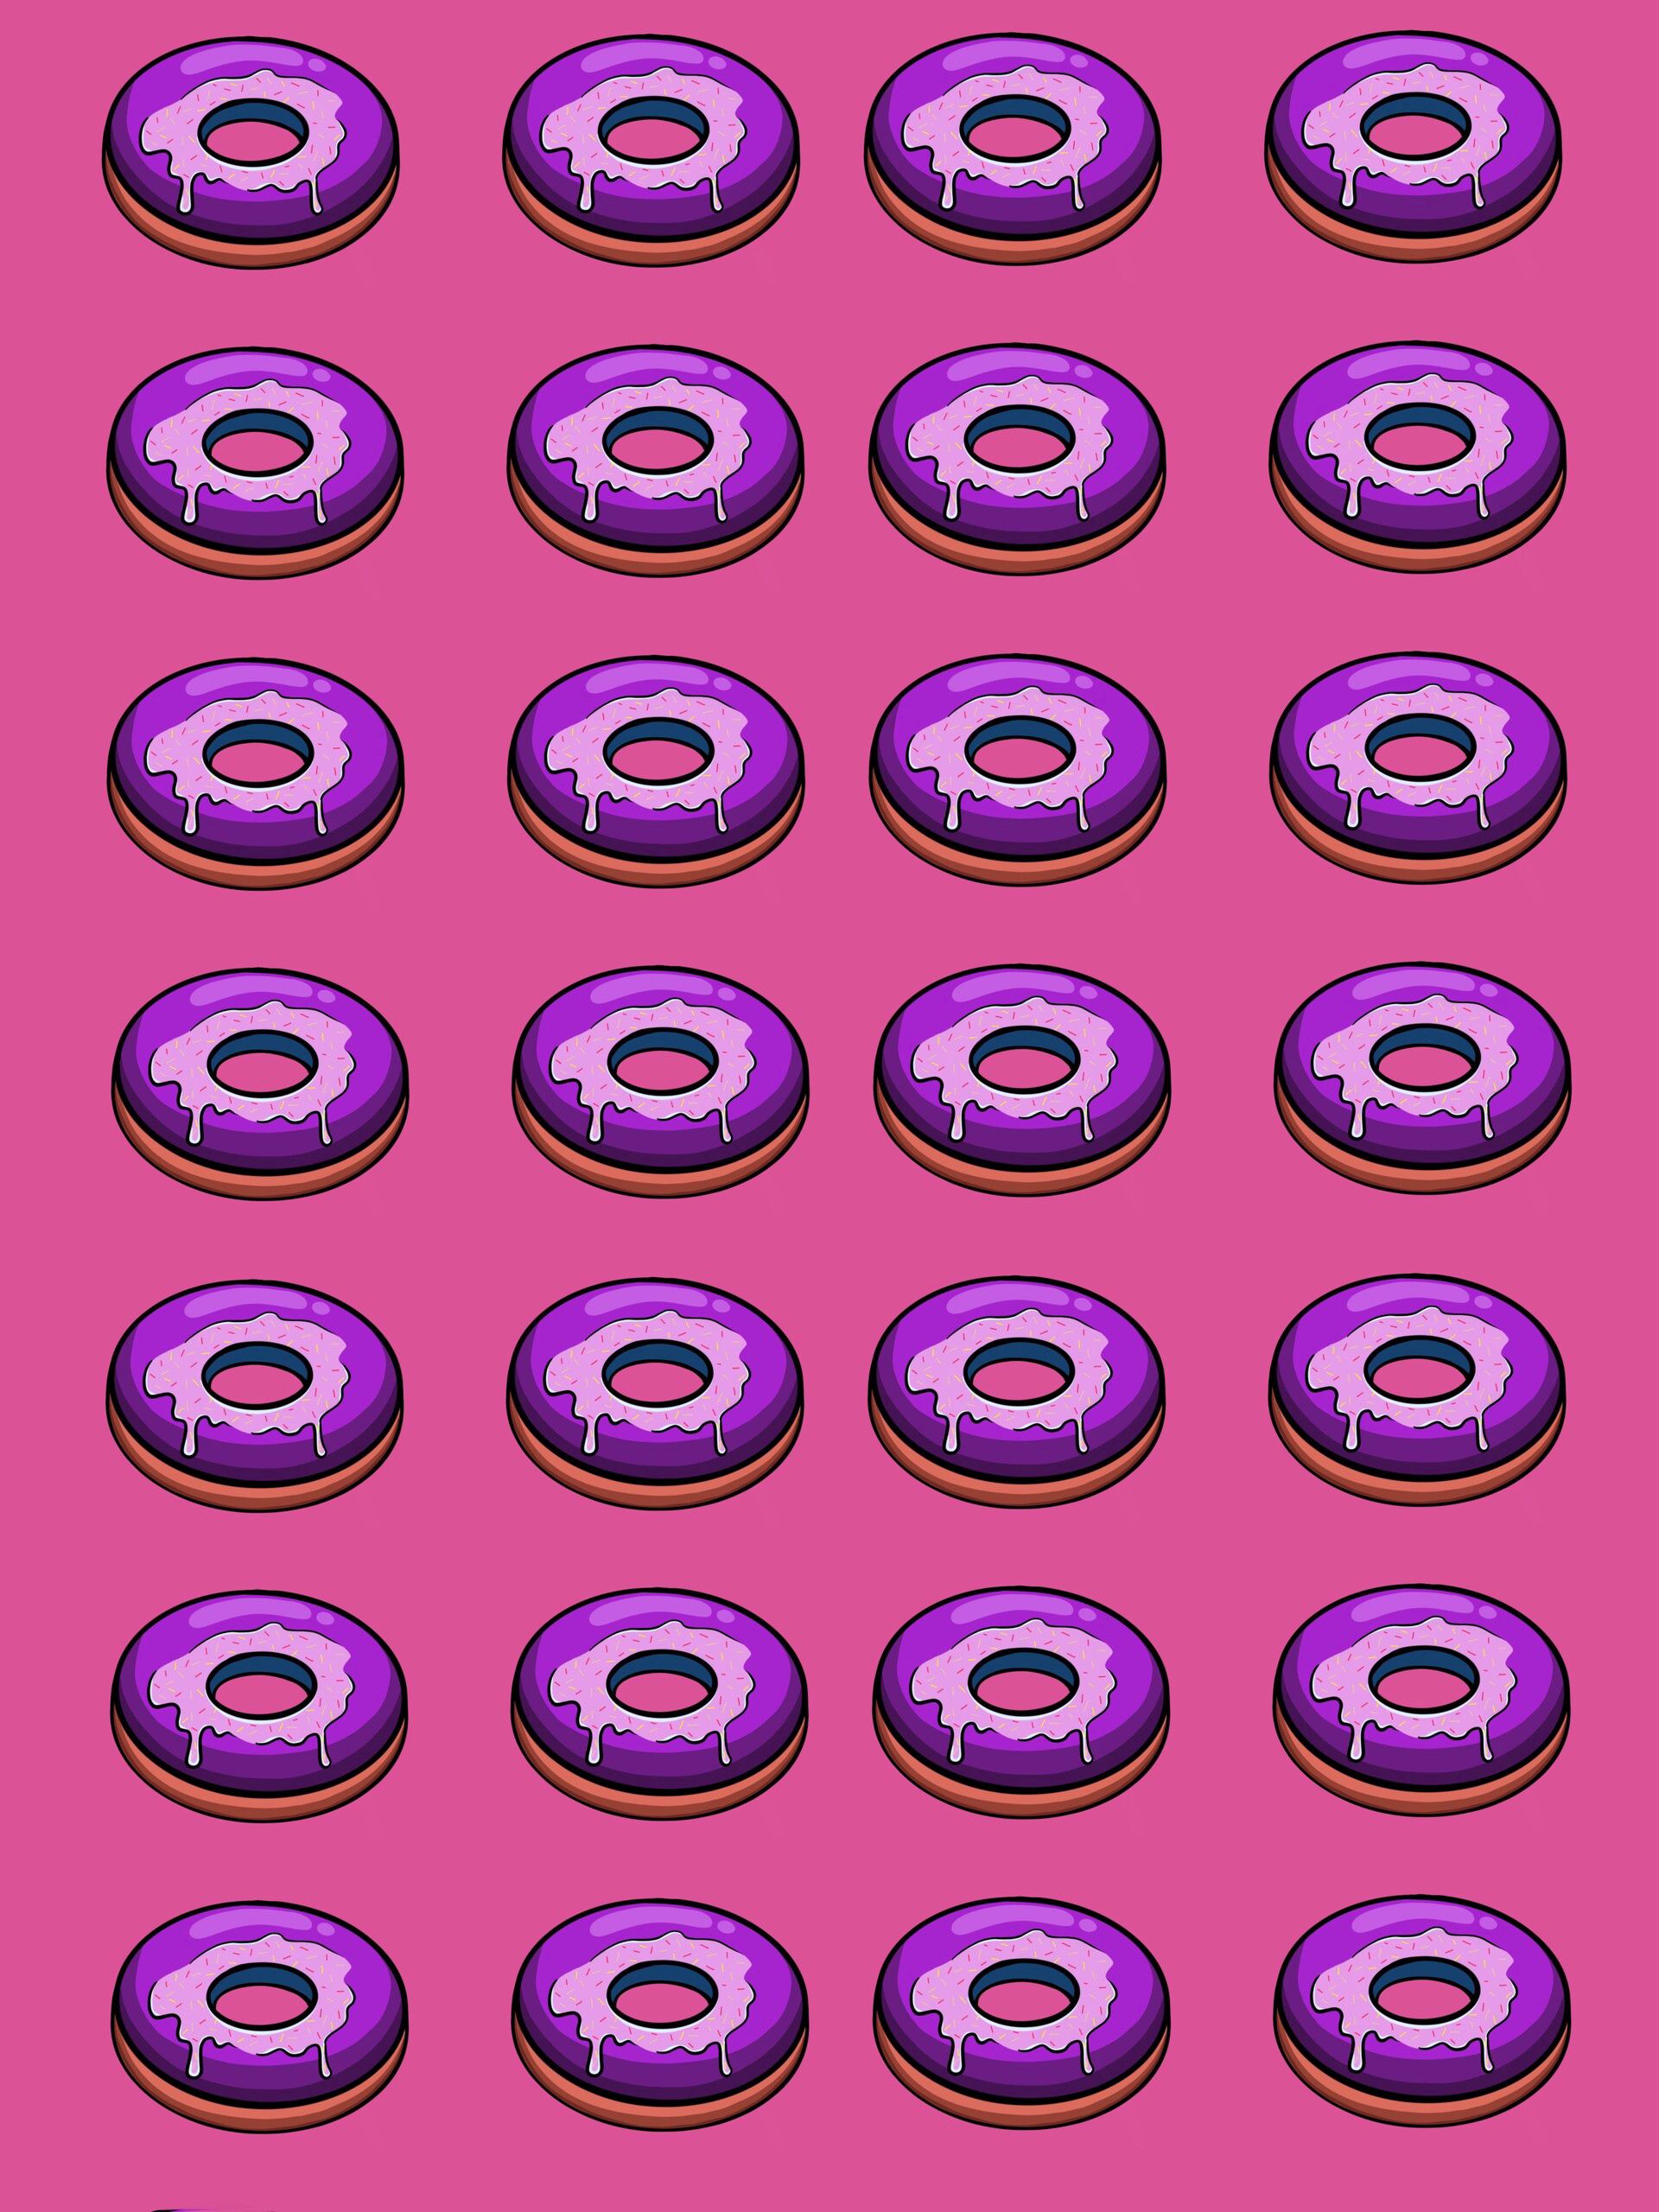 156150 Screensavers and Wallpapers Donuts for phone. Download pattern, texture, textures, sweet, bakery products, baking, sweets, donuts pictures for free